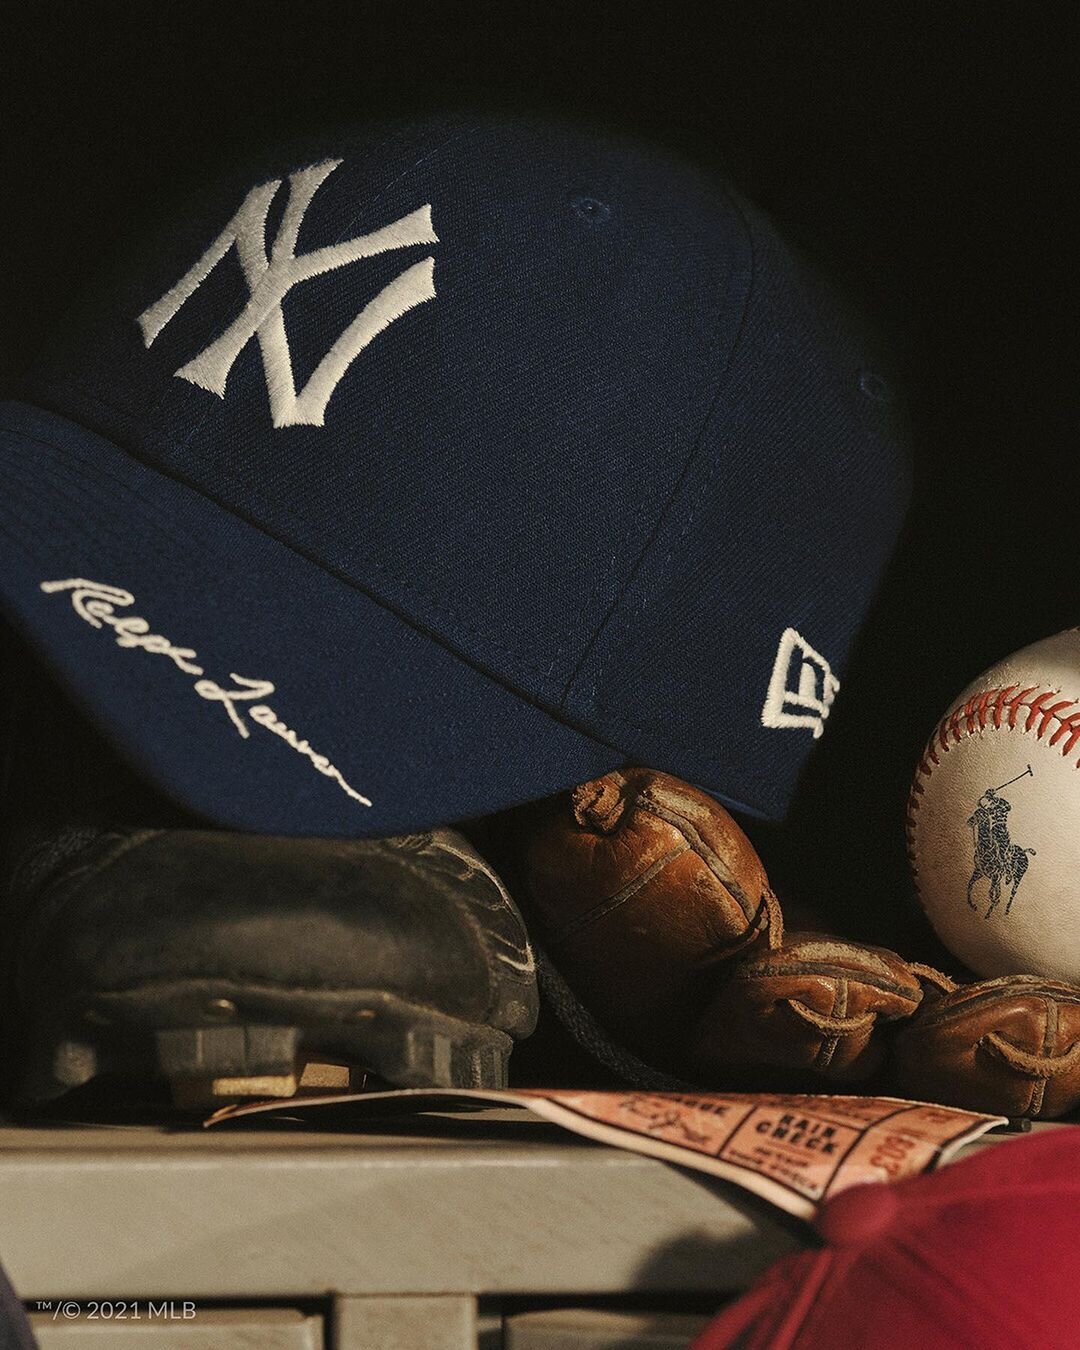 Now Available: Polo Ralph Lauren x New Era MLB Hats — Sneaker Shouts